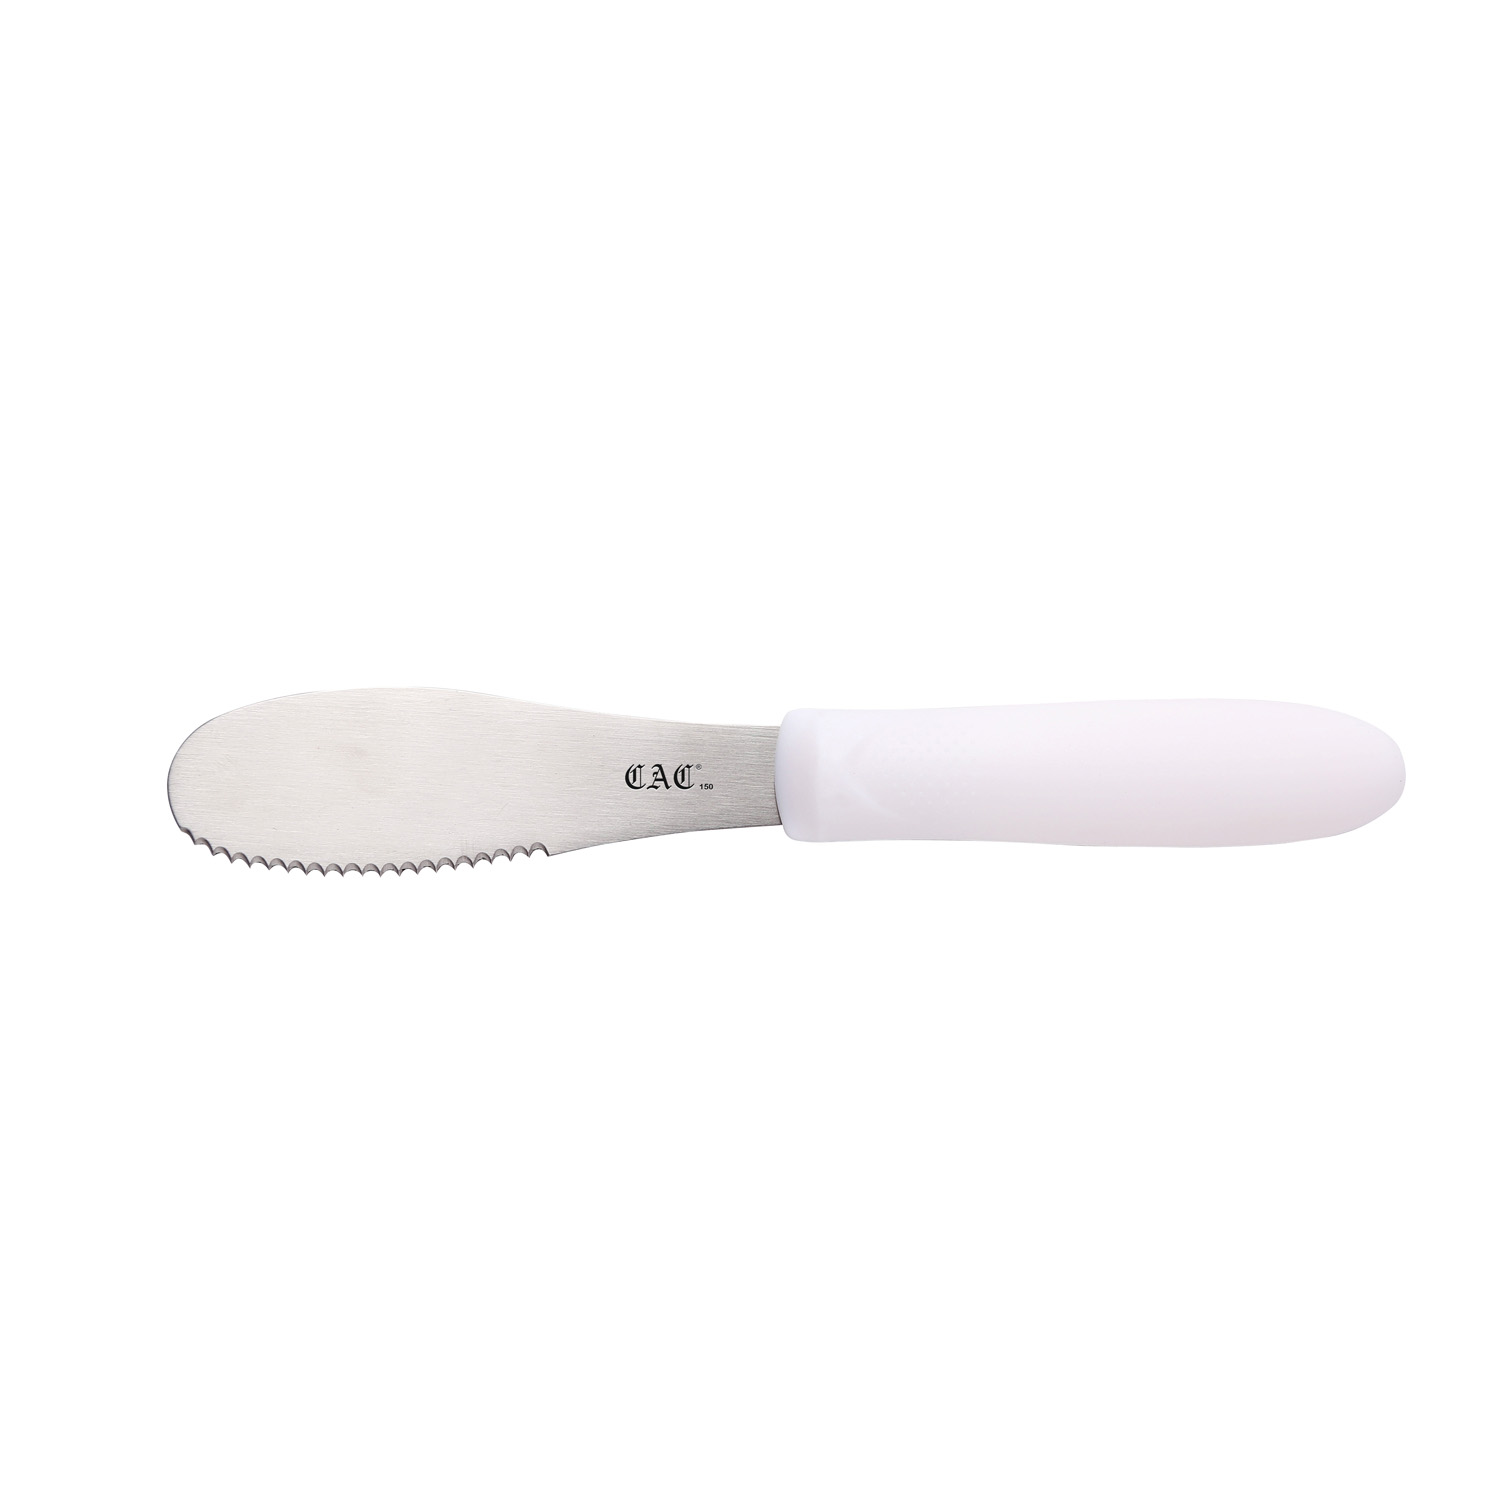 CAC China SPSP-4WT White Serrated Spreader with Plastic Handle 3-7/8"